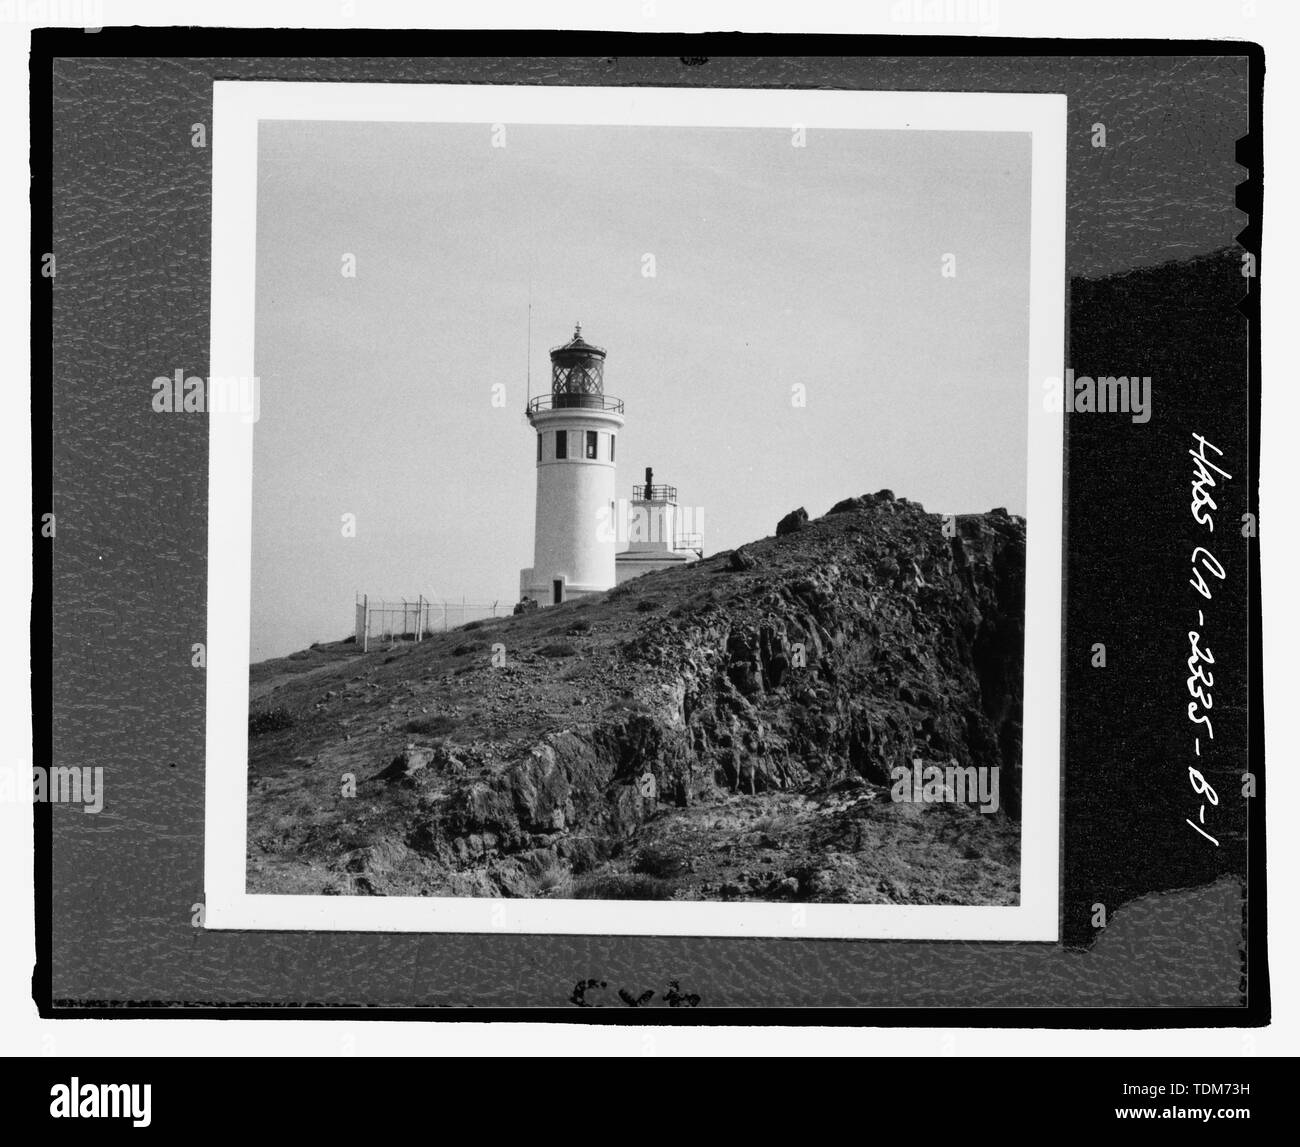 PERSPECTIVE VIEW OF LIGHT TOWER AND FOG HORN HOUSE - Anacapa Island Light Station, Light Tower, East Anacapa Island, Ventura, Ventura County, CA Stock Photo